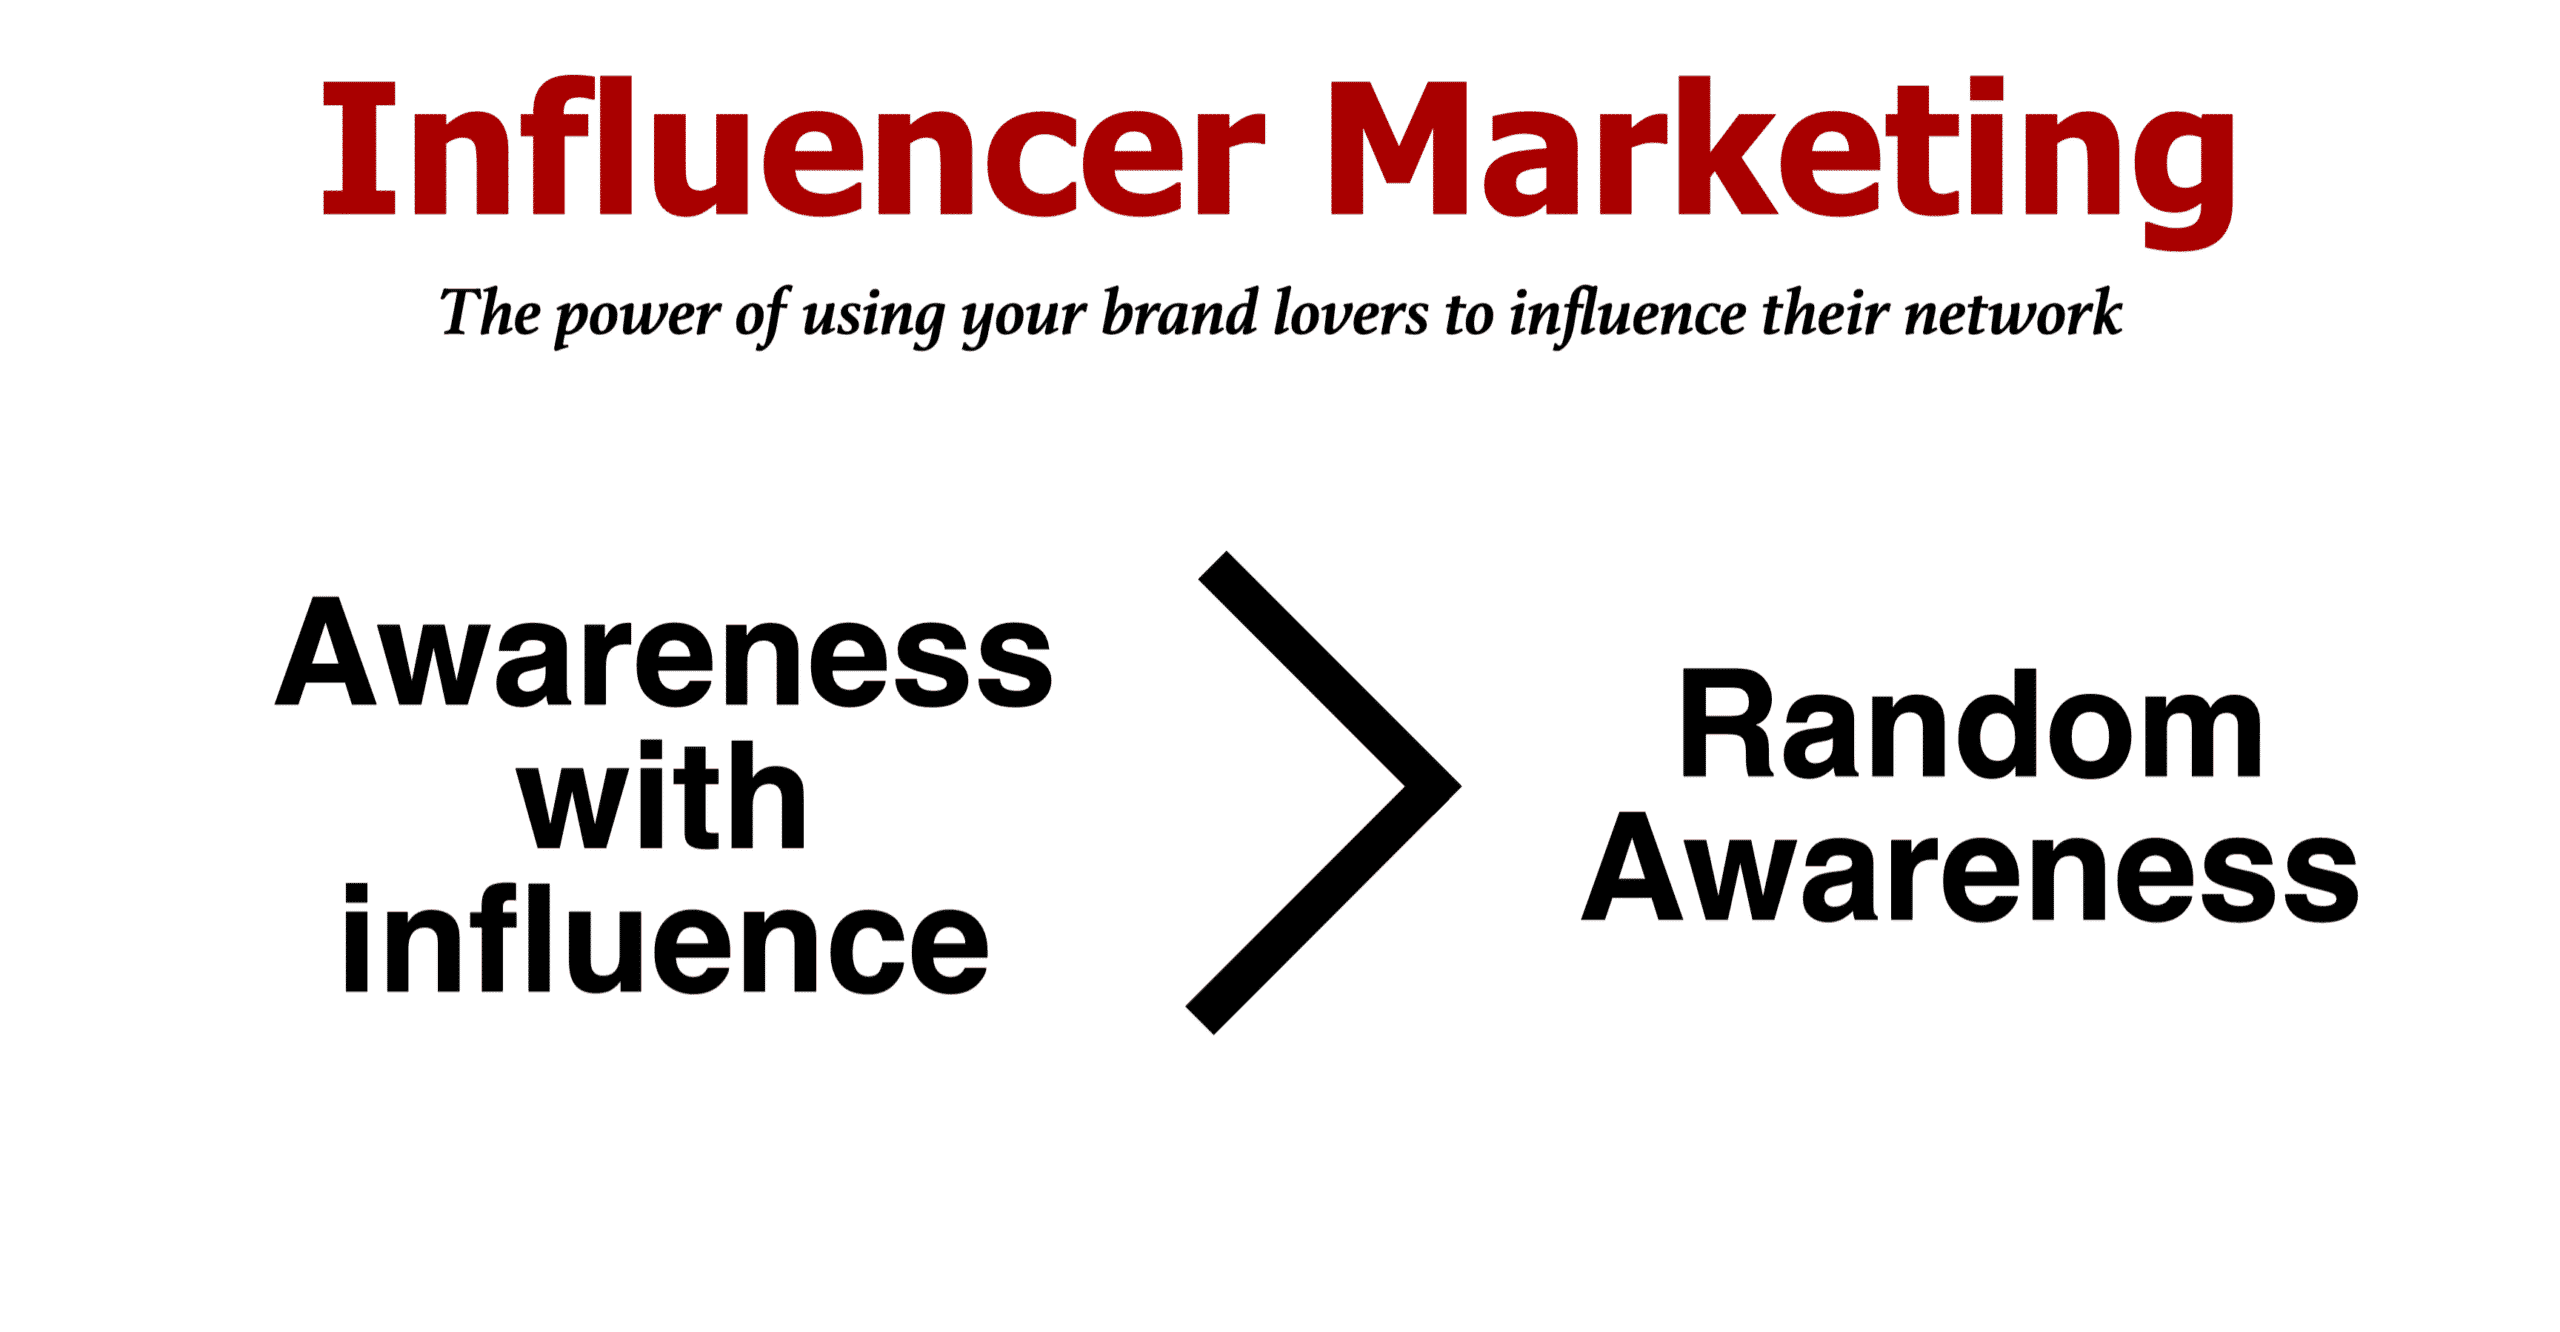 Influencer Marketing uses brand lovers to influence their network